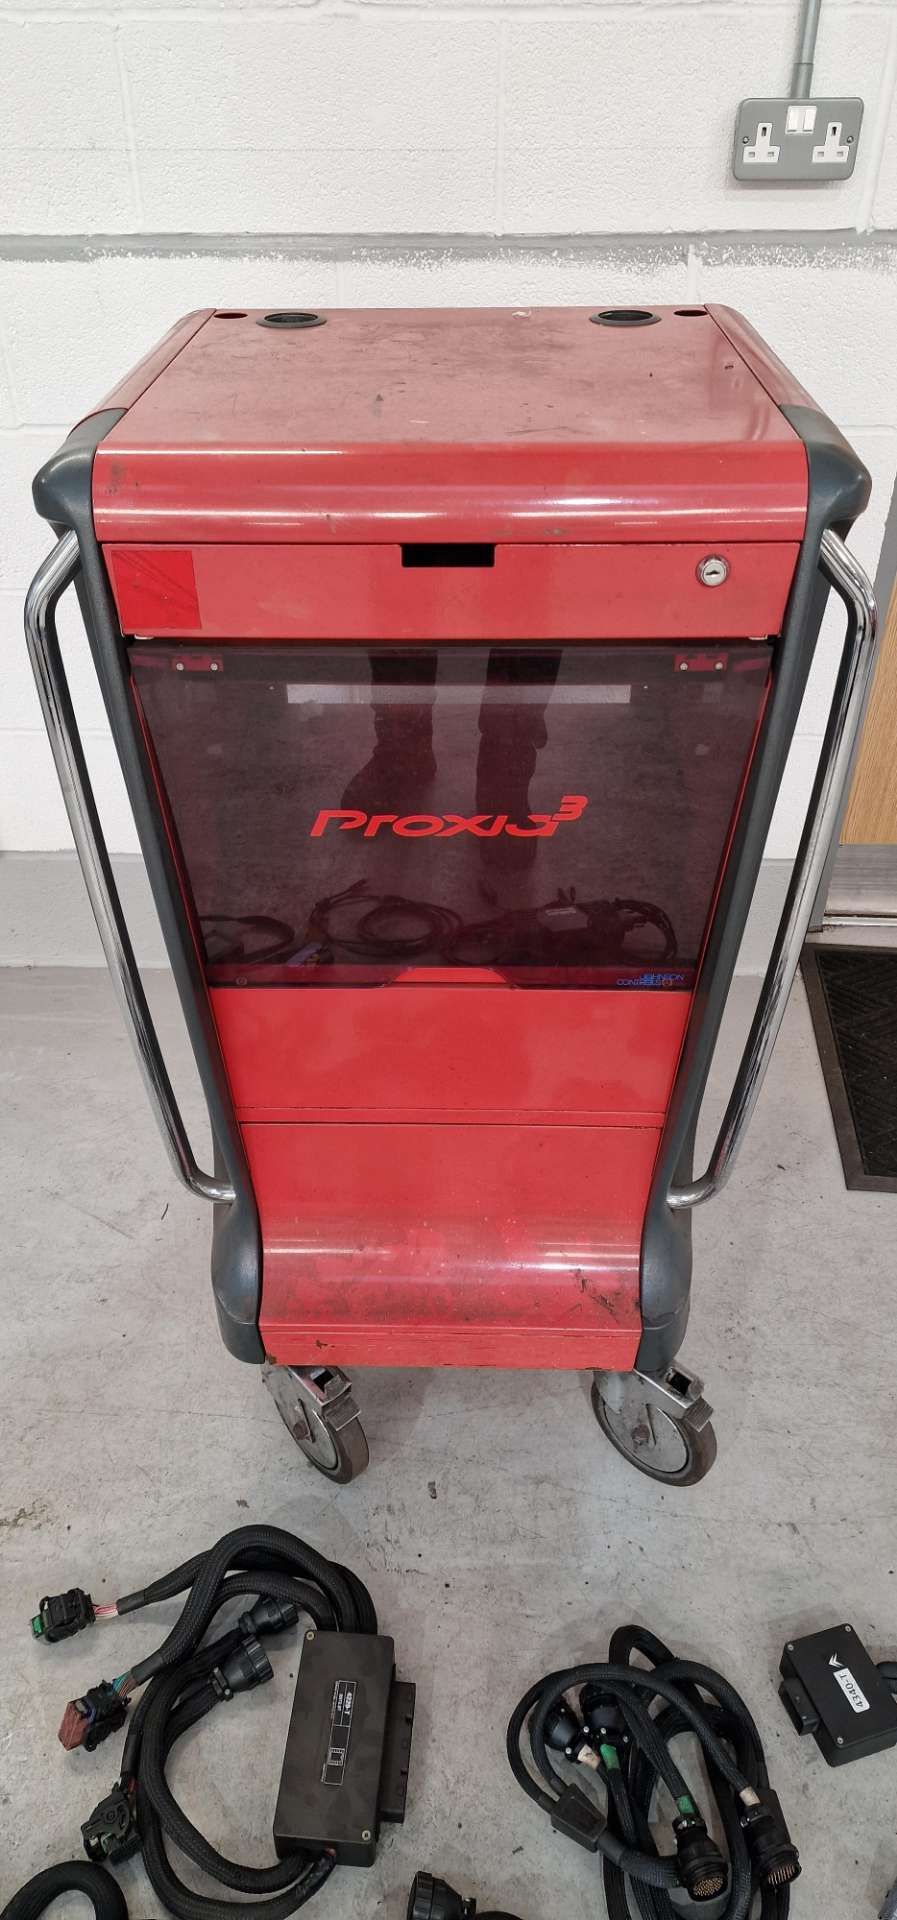 EX-CITROEN DIAGNOSTIC TROLLEY PROXI 3, with some diagnostic kit - Image 4 of 4